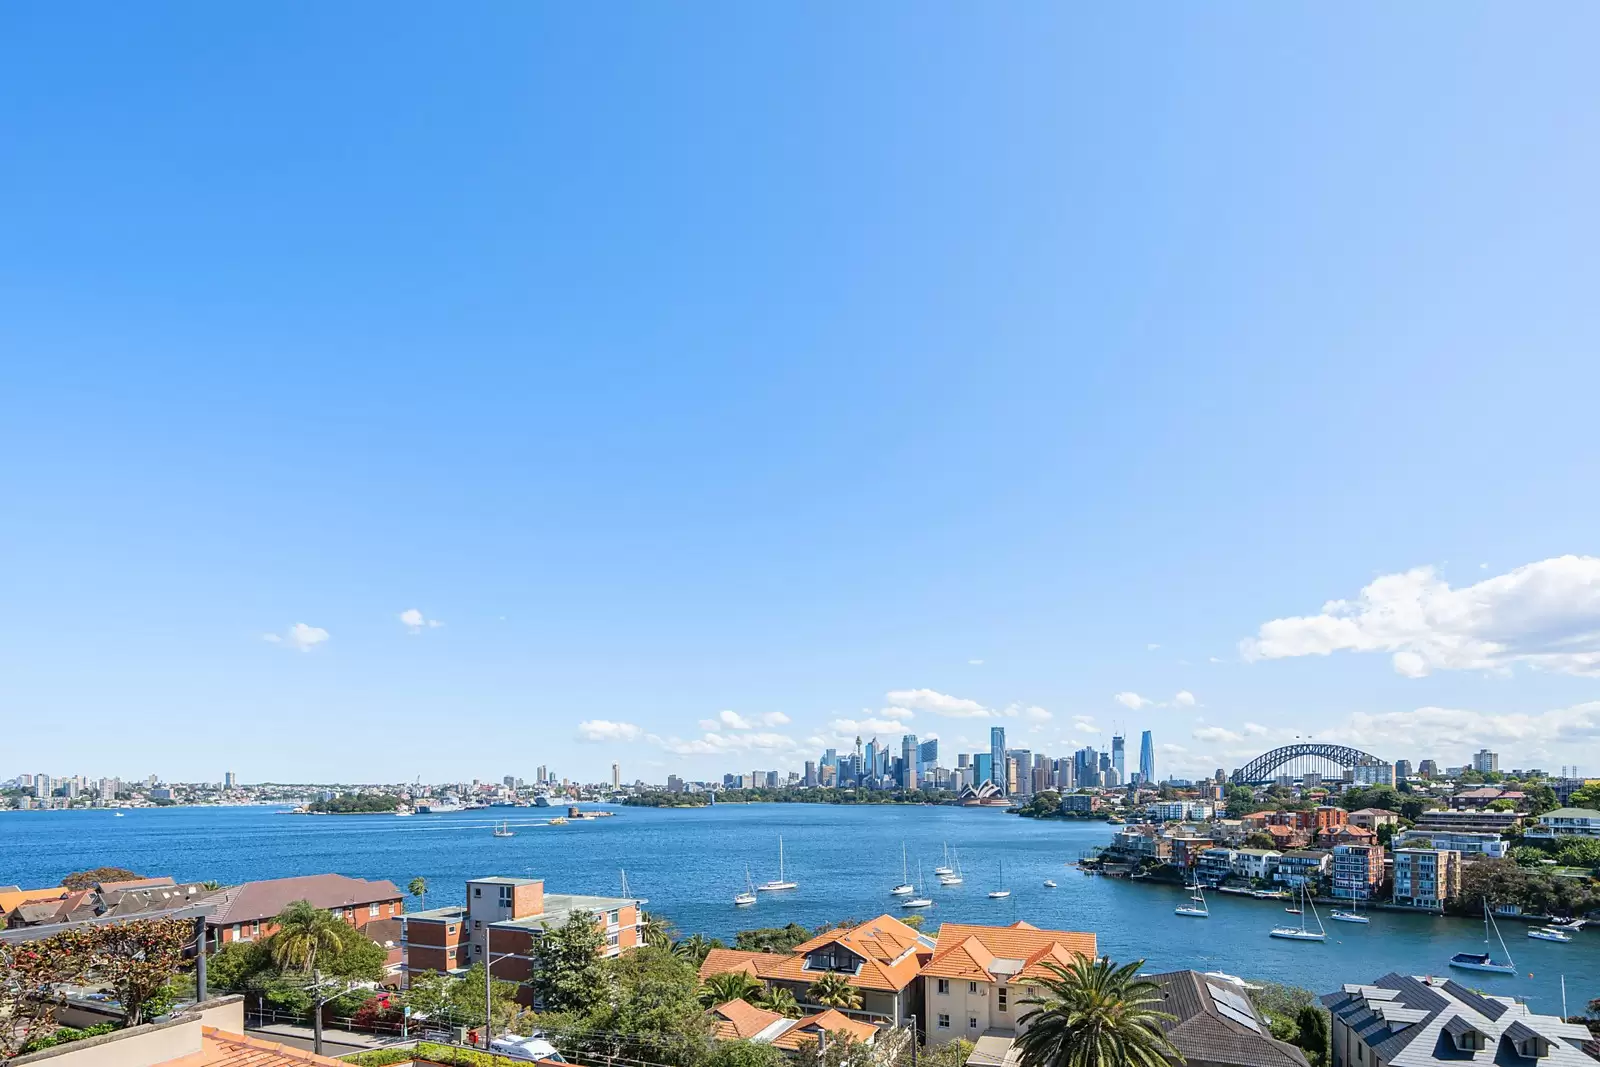 Photo #19: 29 Milson Road, Cremorne Point - Sold by Sydney Sotheby's International Realty